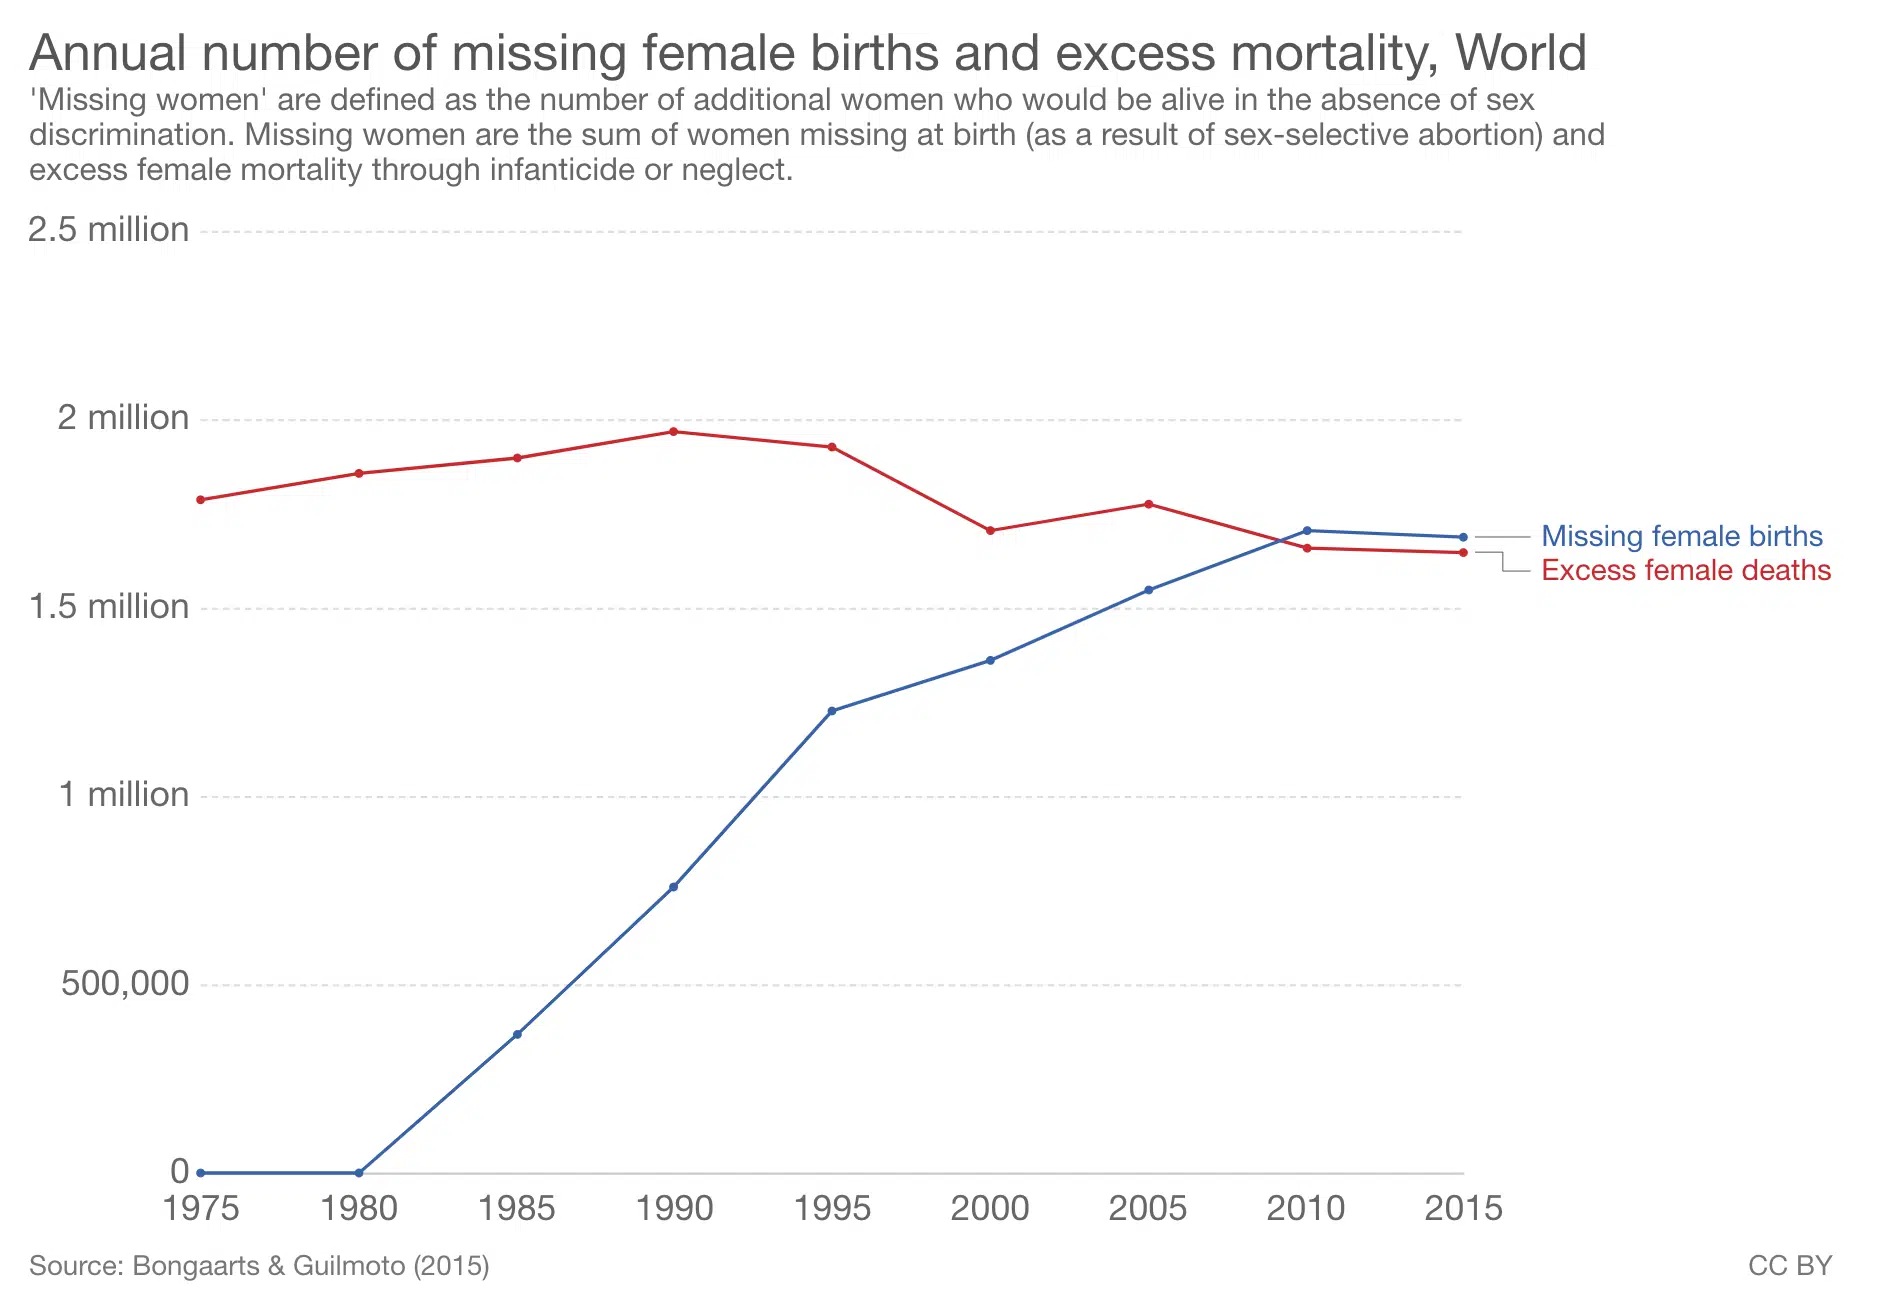 women killed by neglect, infanticide, and sex-selective abortion in the world per year